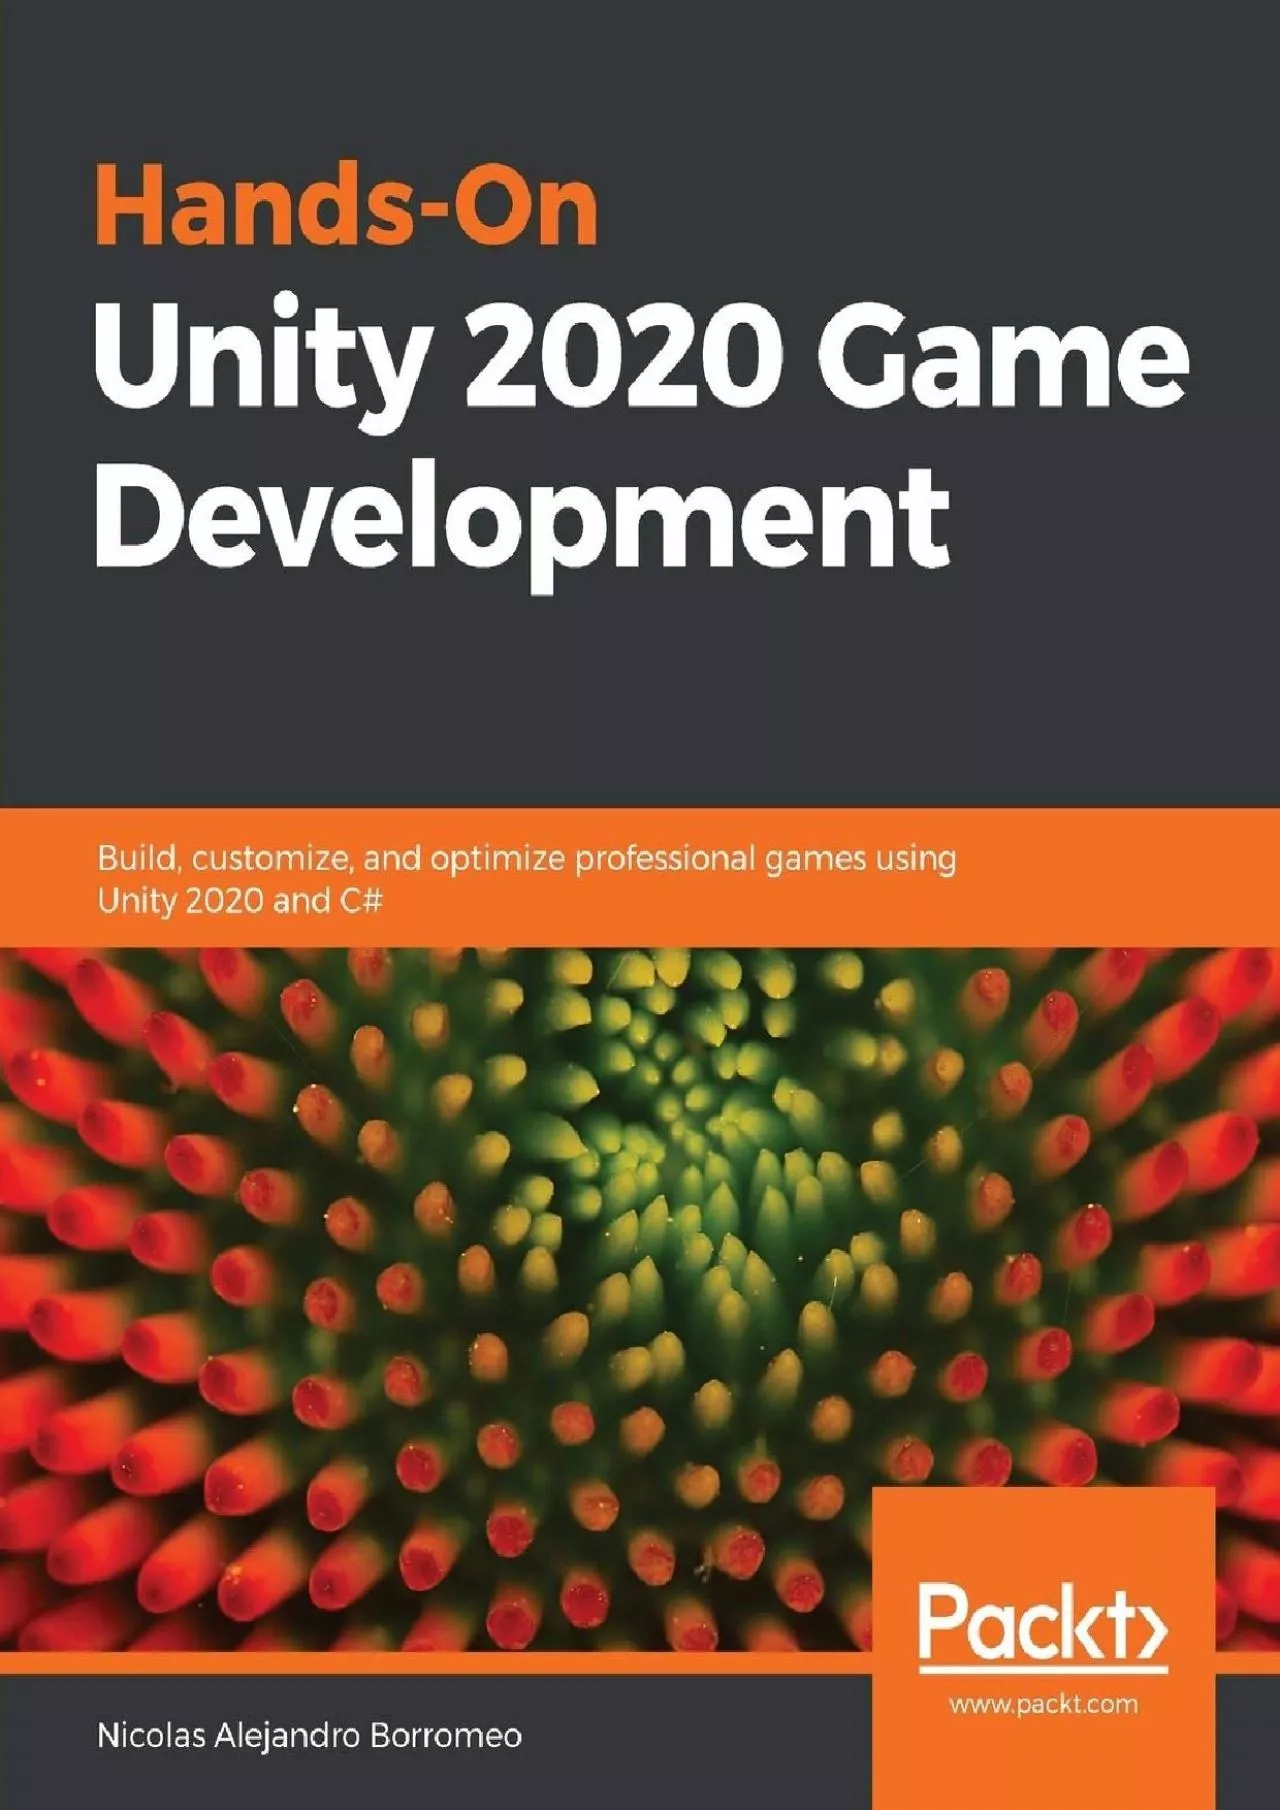 [BEST]-Hands-On Unity 2020 Game Development: Build, customize, and optimize professional